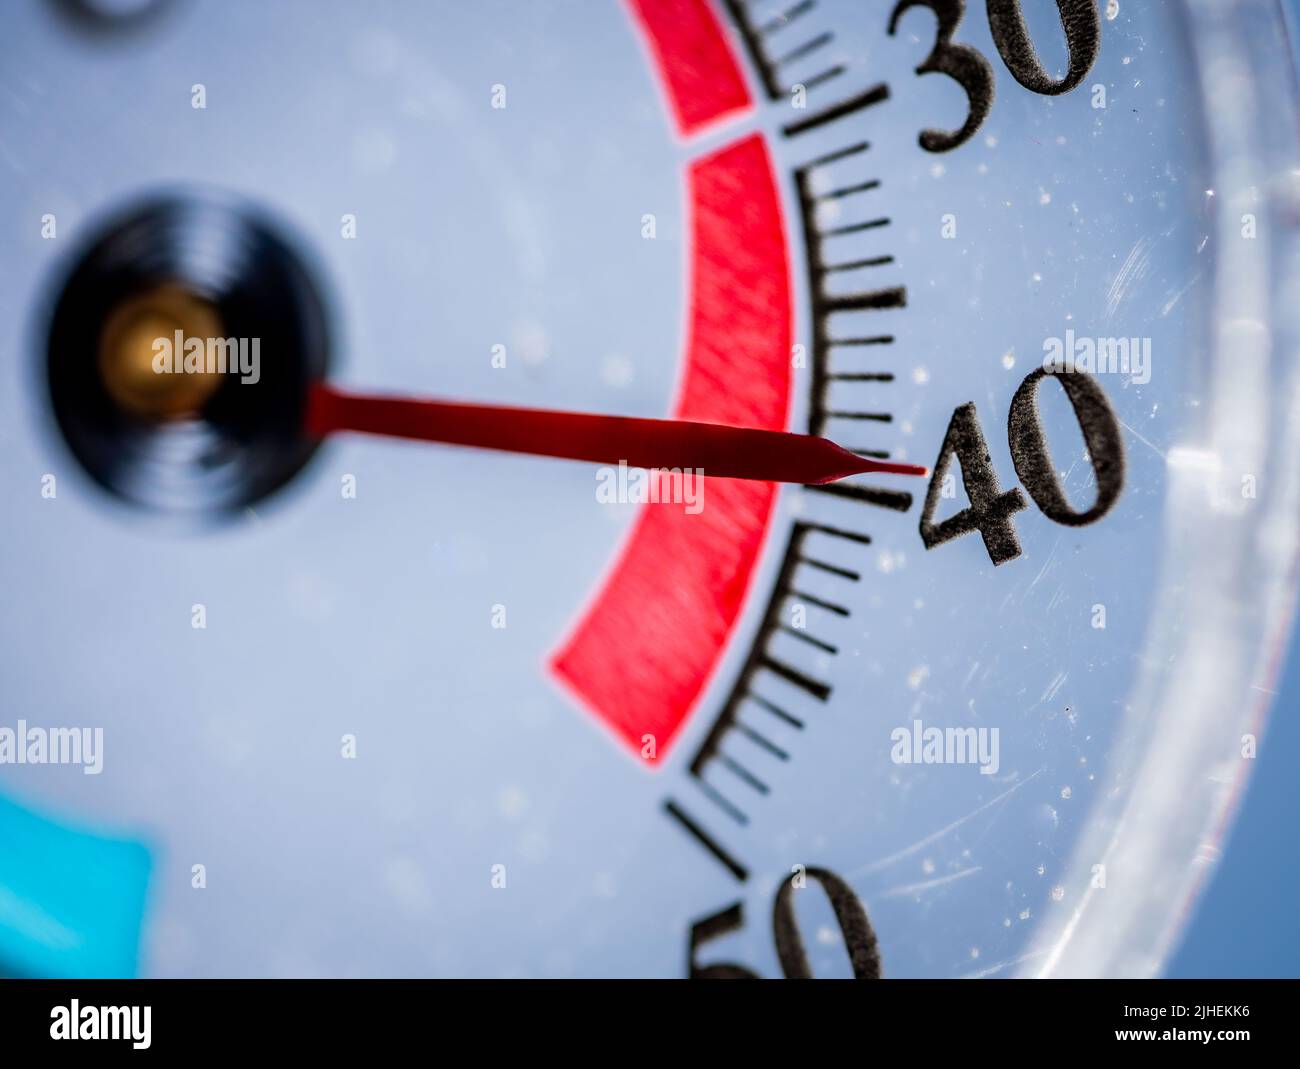 18 July 2022, Hessen, Frankfurt/Main: ILLUSTRATION - An outdoor thermometer shows a temperature of nearly 40 degrees Celsius against a blue sky. Photo: Frank Rumpenhorst/dpa Stock Photo